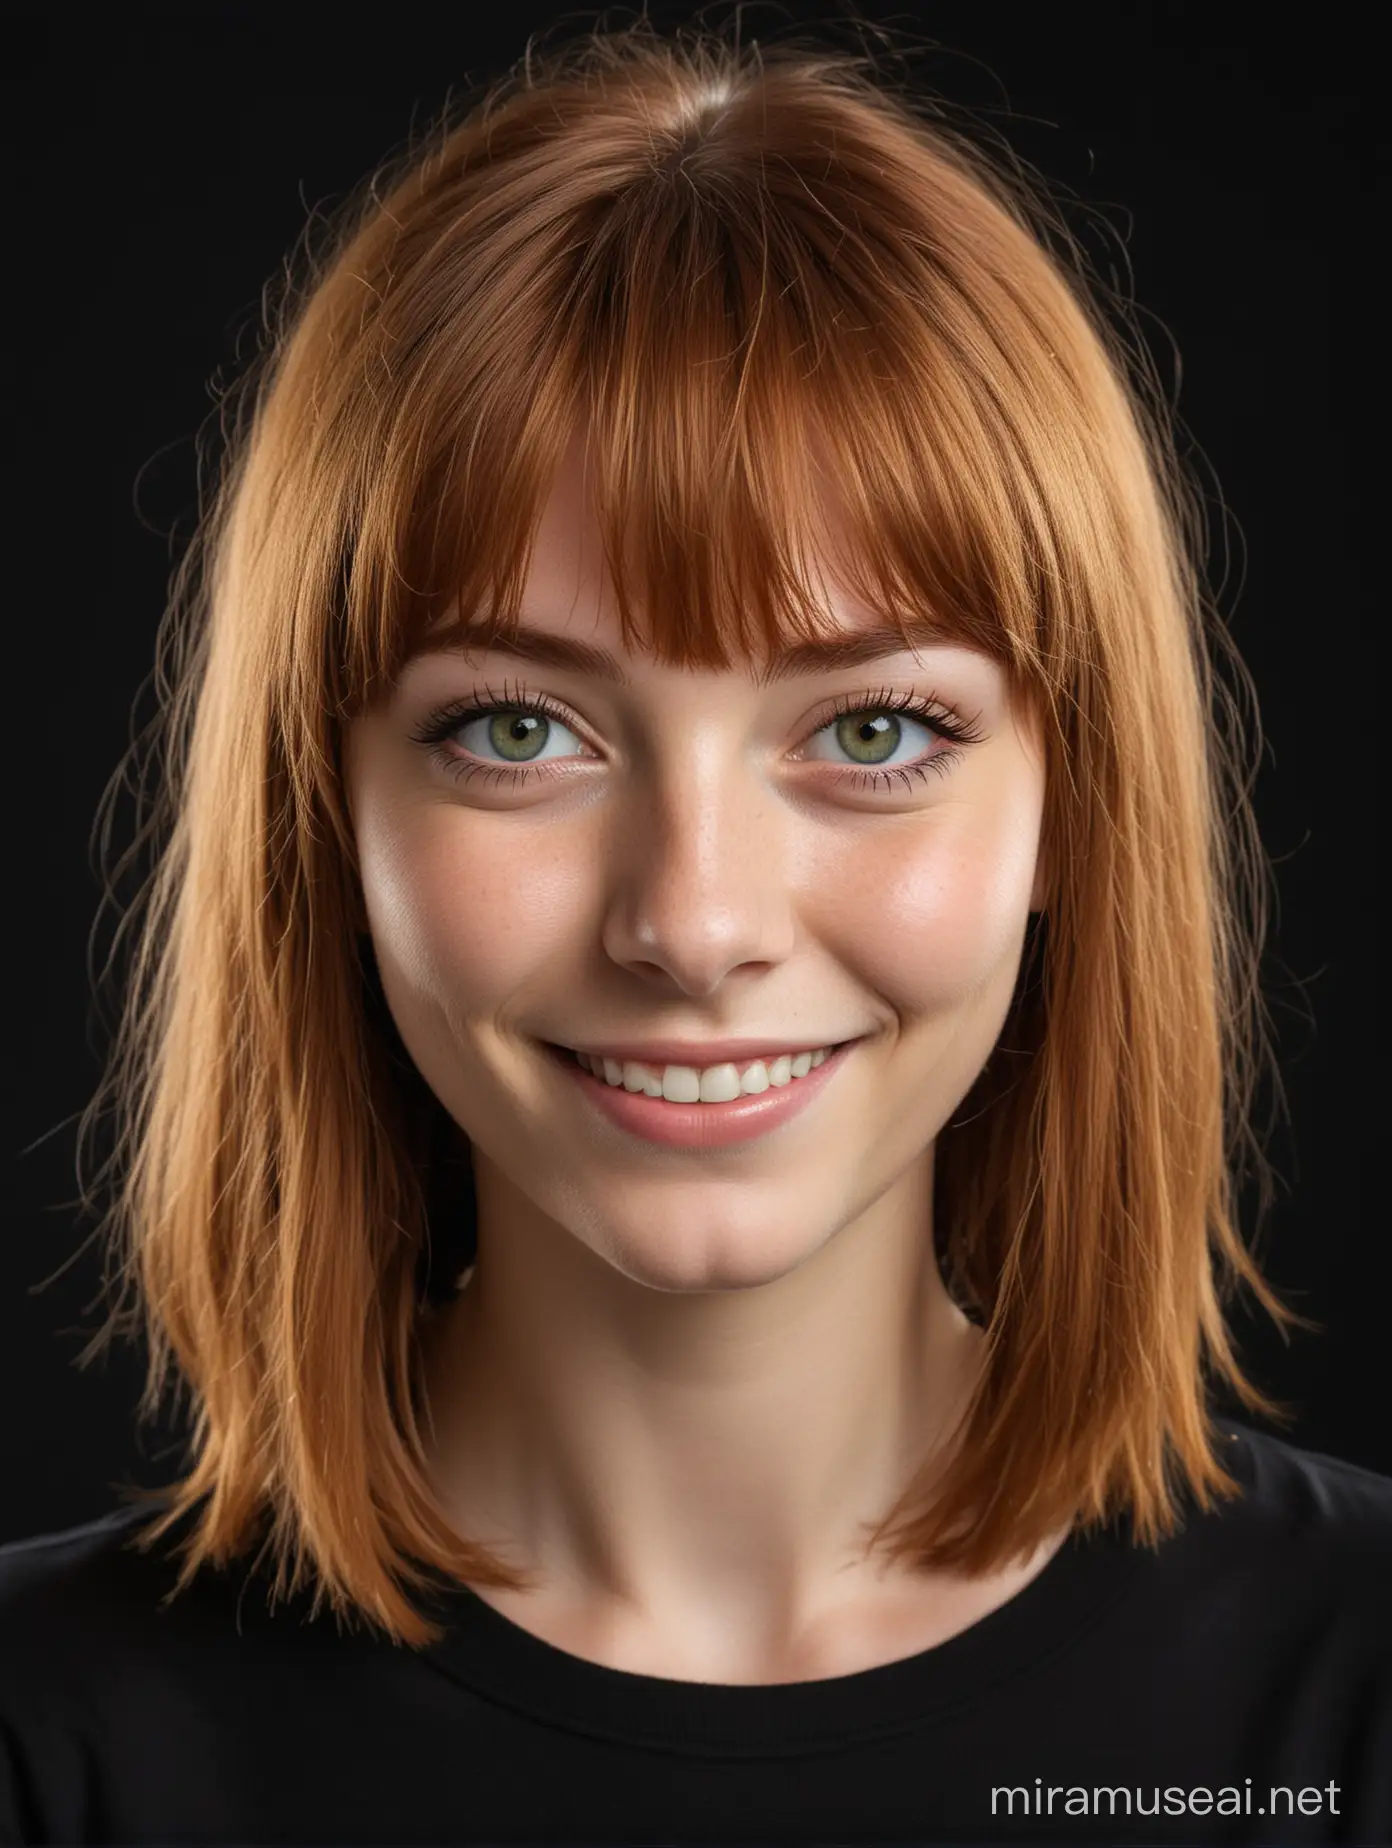 head and upper body picture of a girl with super green eyes, wearing a black top, ginger hair 1960 bob bangs, black background looking at the camera, no makeup, smiling